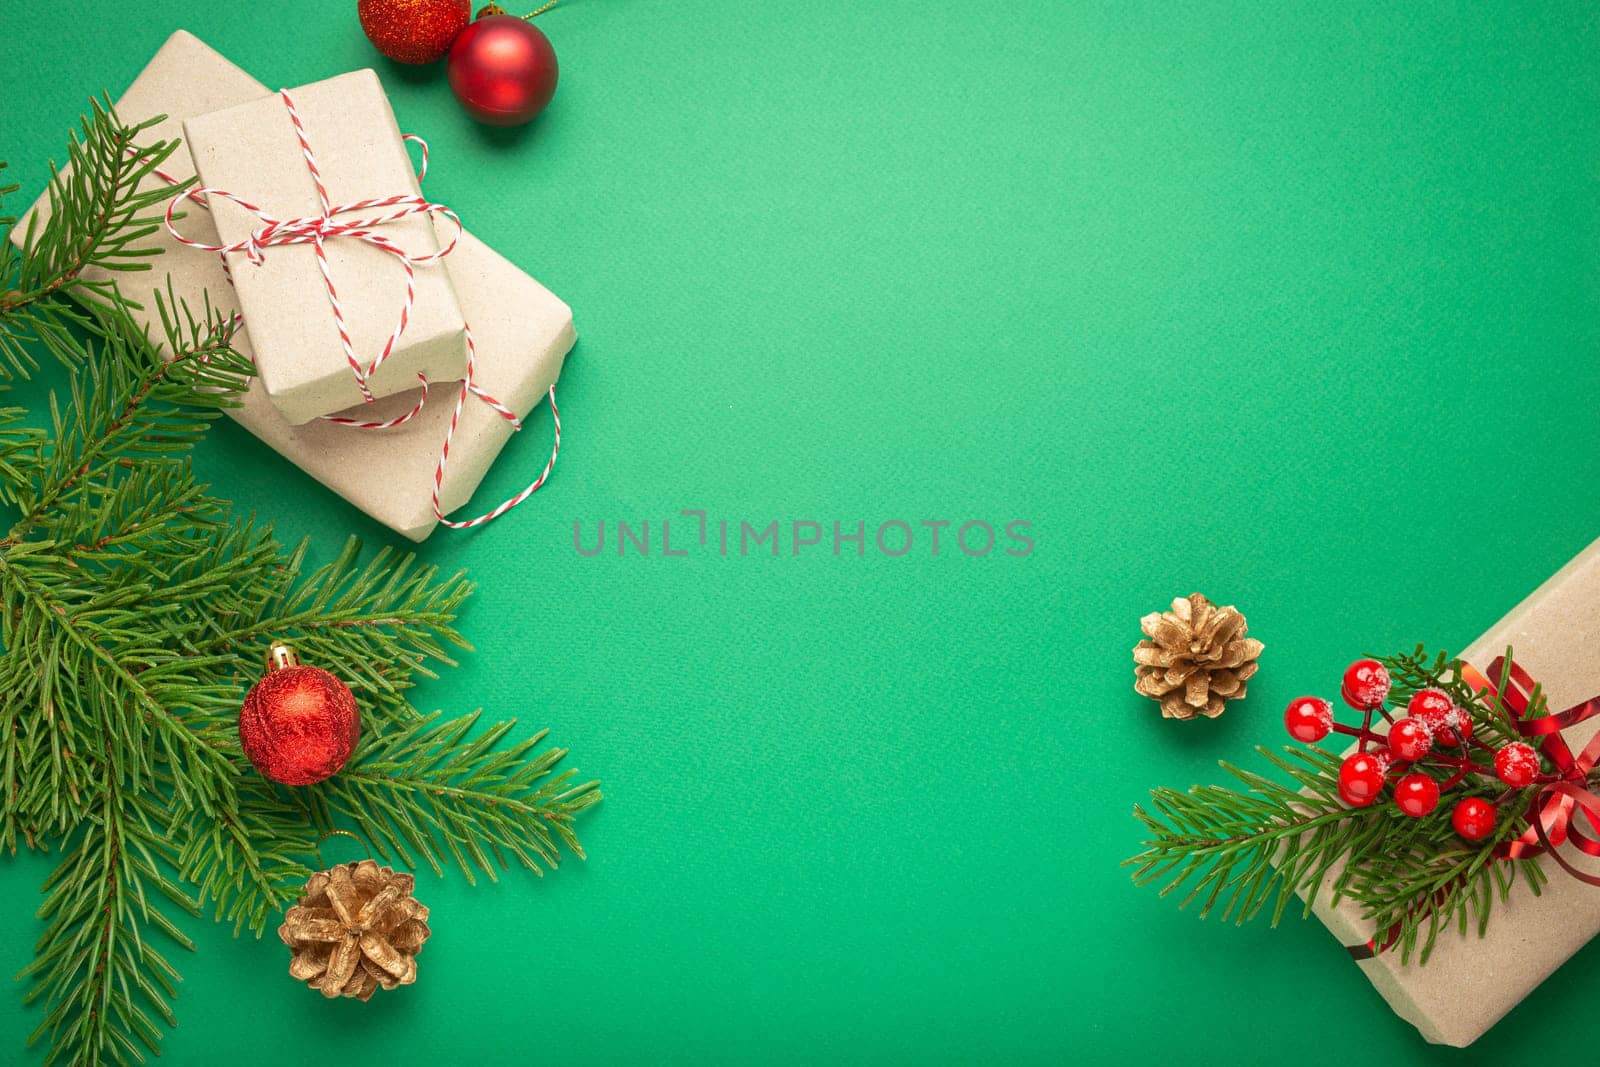 Christmas or New Year celebration green paper festive background with decoration fir tree, present boxes, cones, berries, sparkly red balls. Space for text..